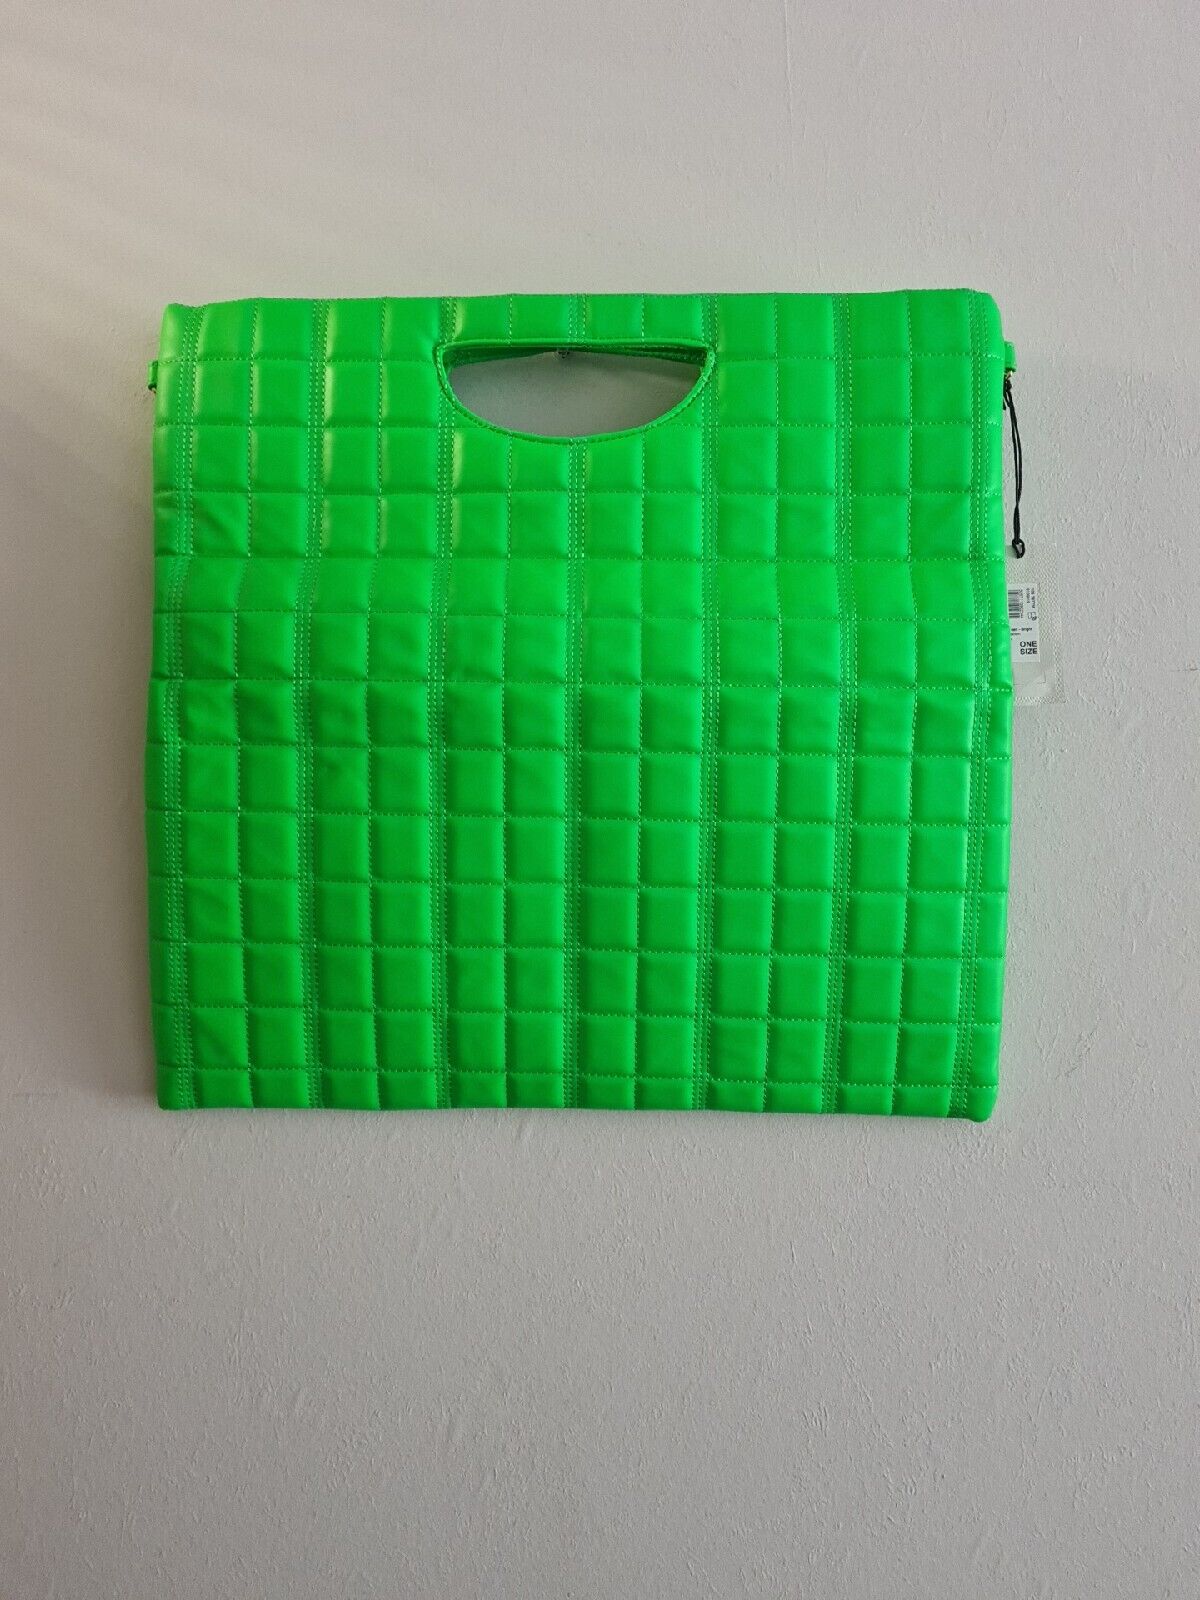 River Island Large Folded Quilted Clutch Bag - Green BNWT Ref****V500